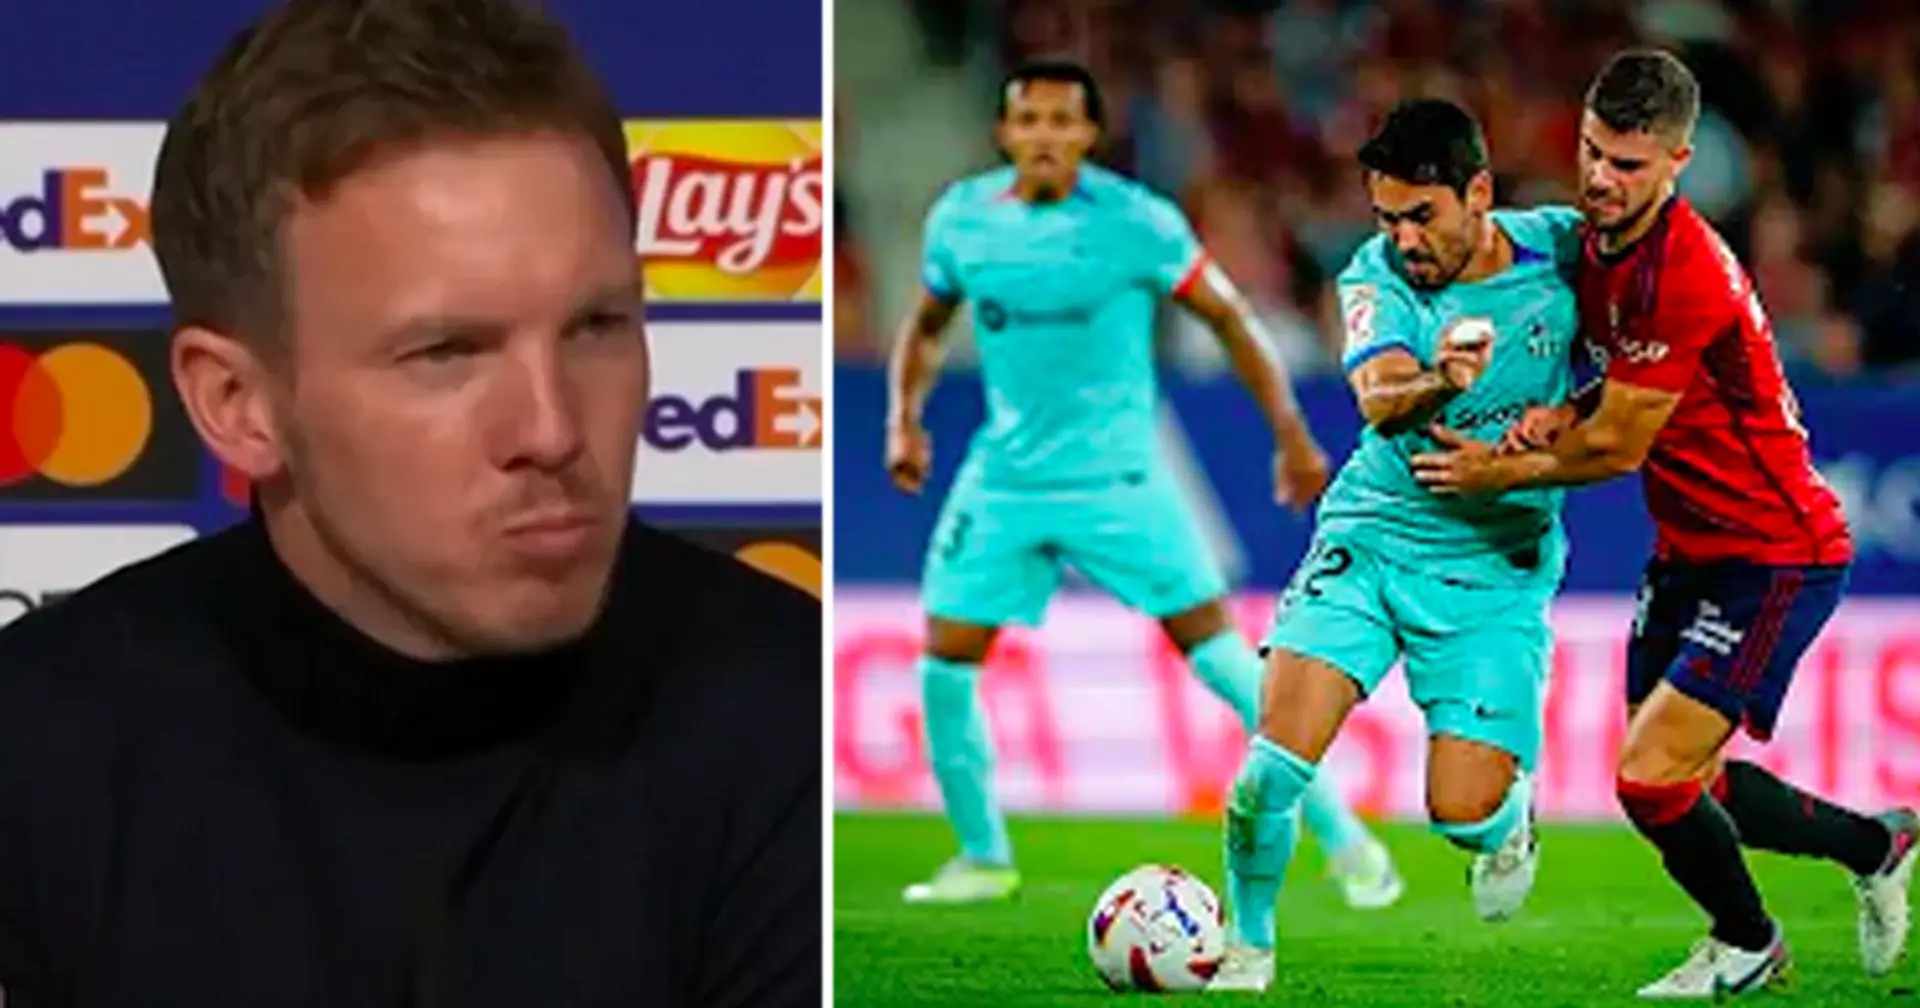 Nagelsmann will be coaching 2 Barca players soon: explained